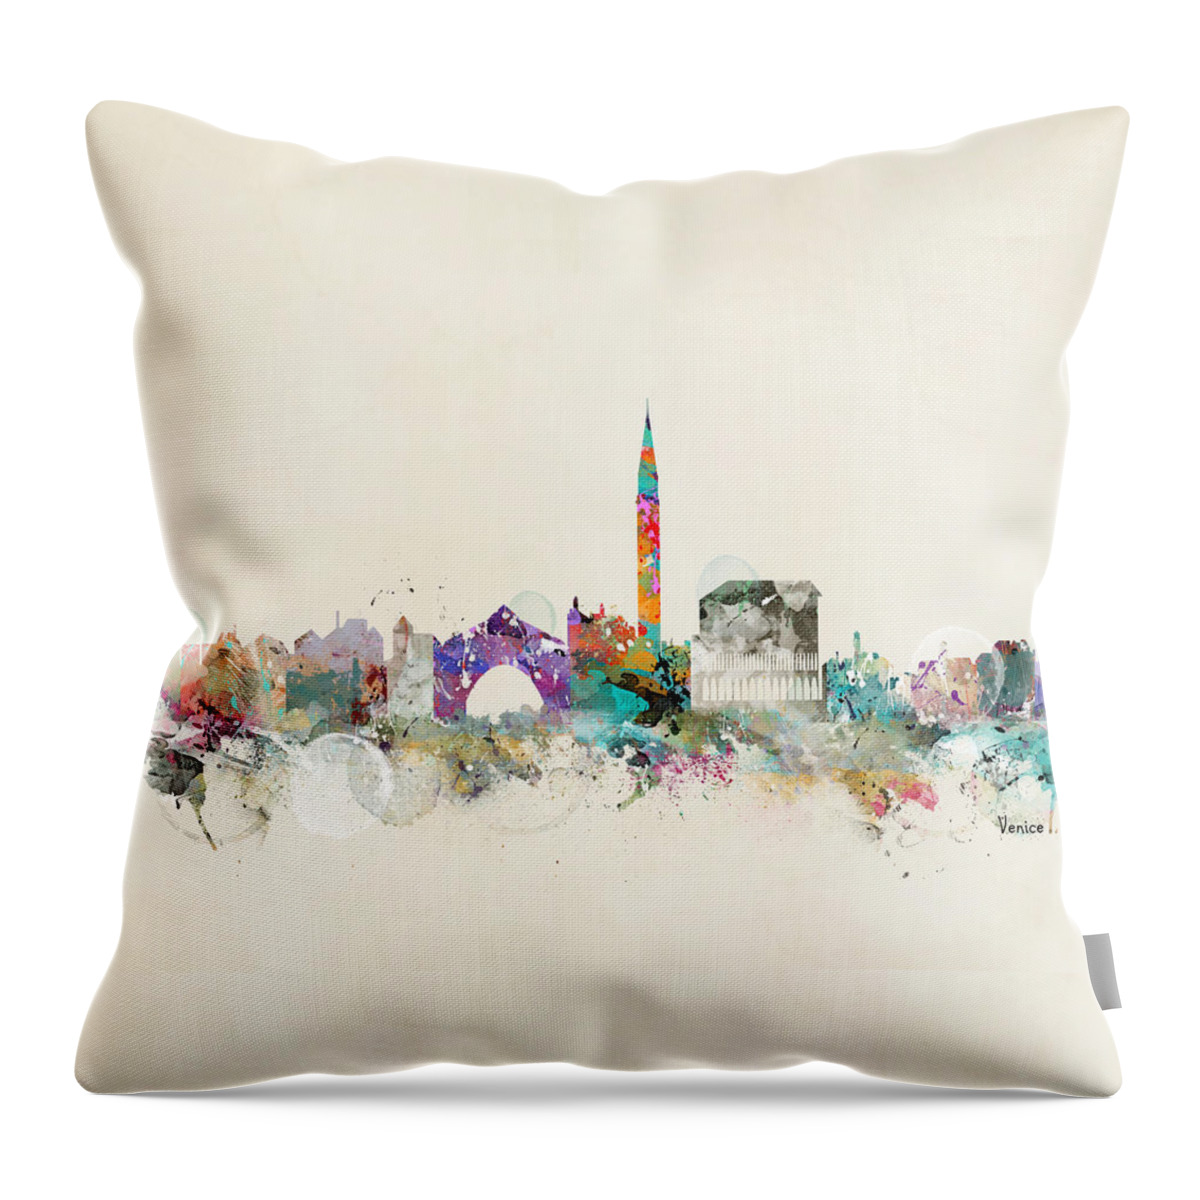 Venice Throw Pillow featuring the painting Venice Italy Skyline by Bri Buckley